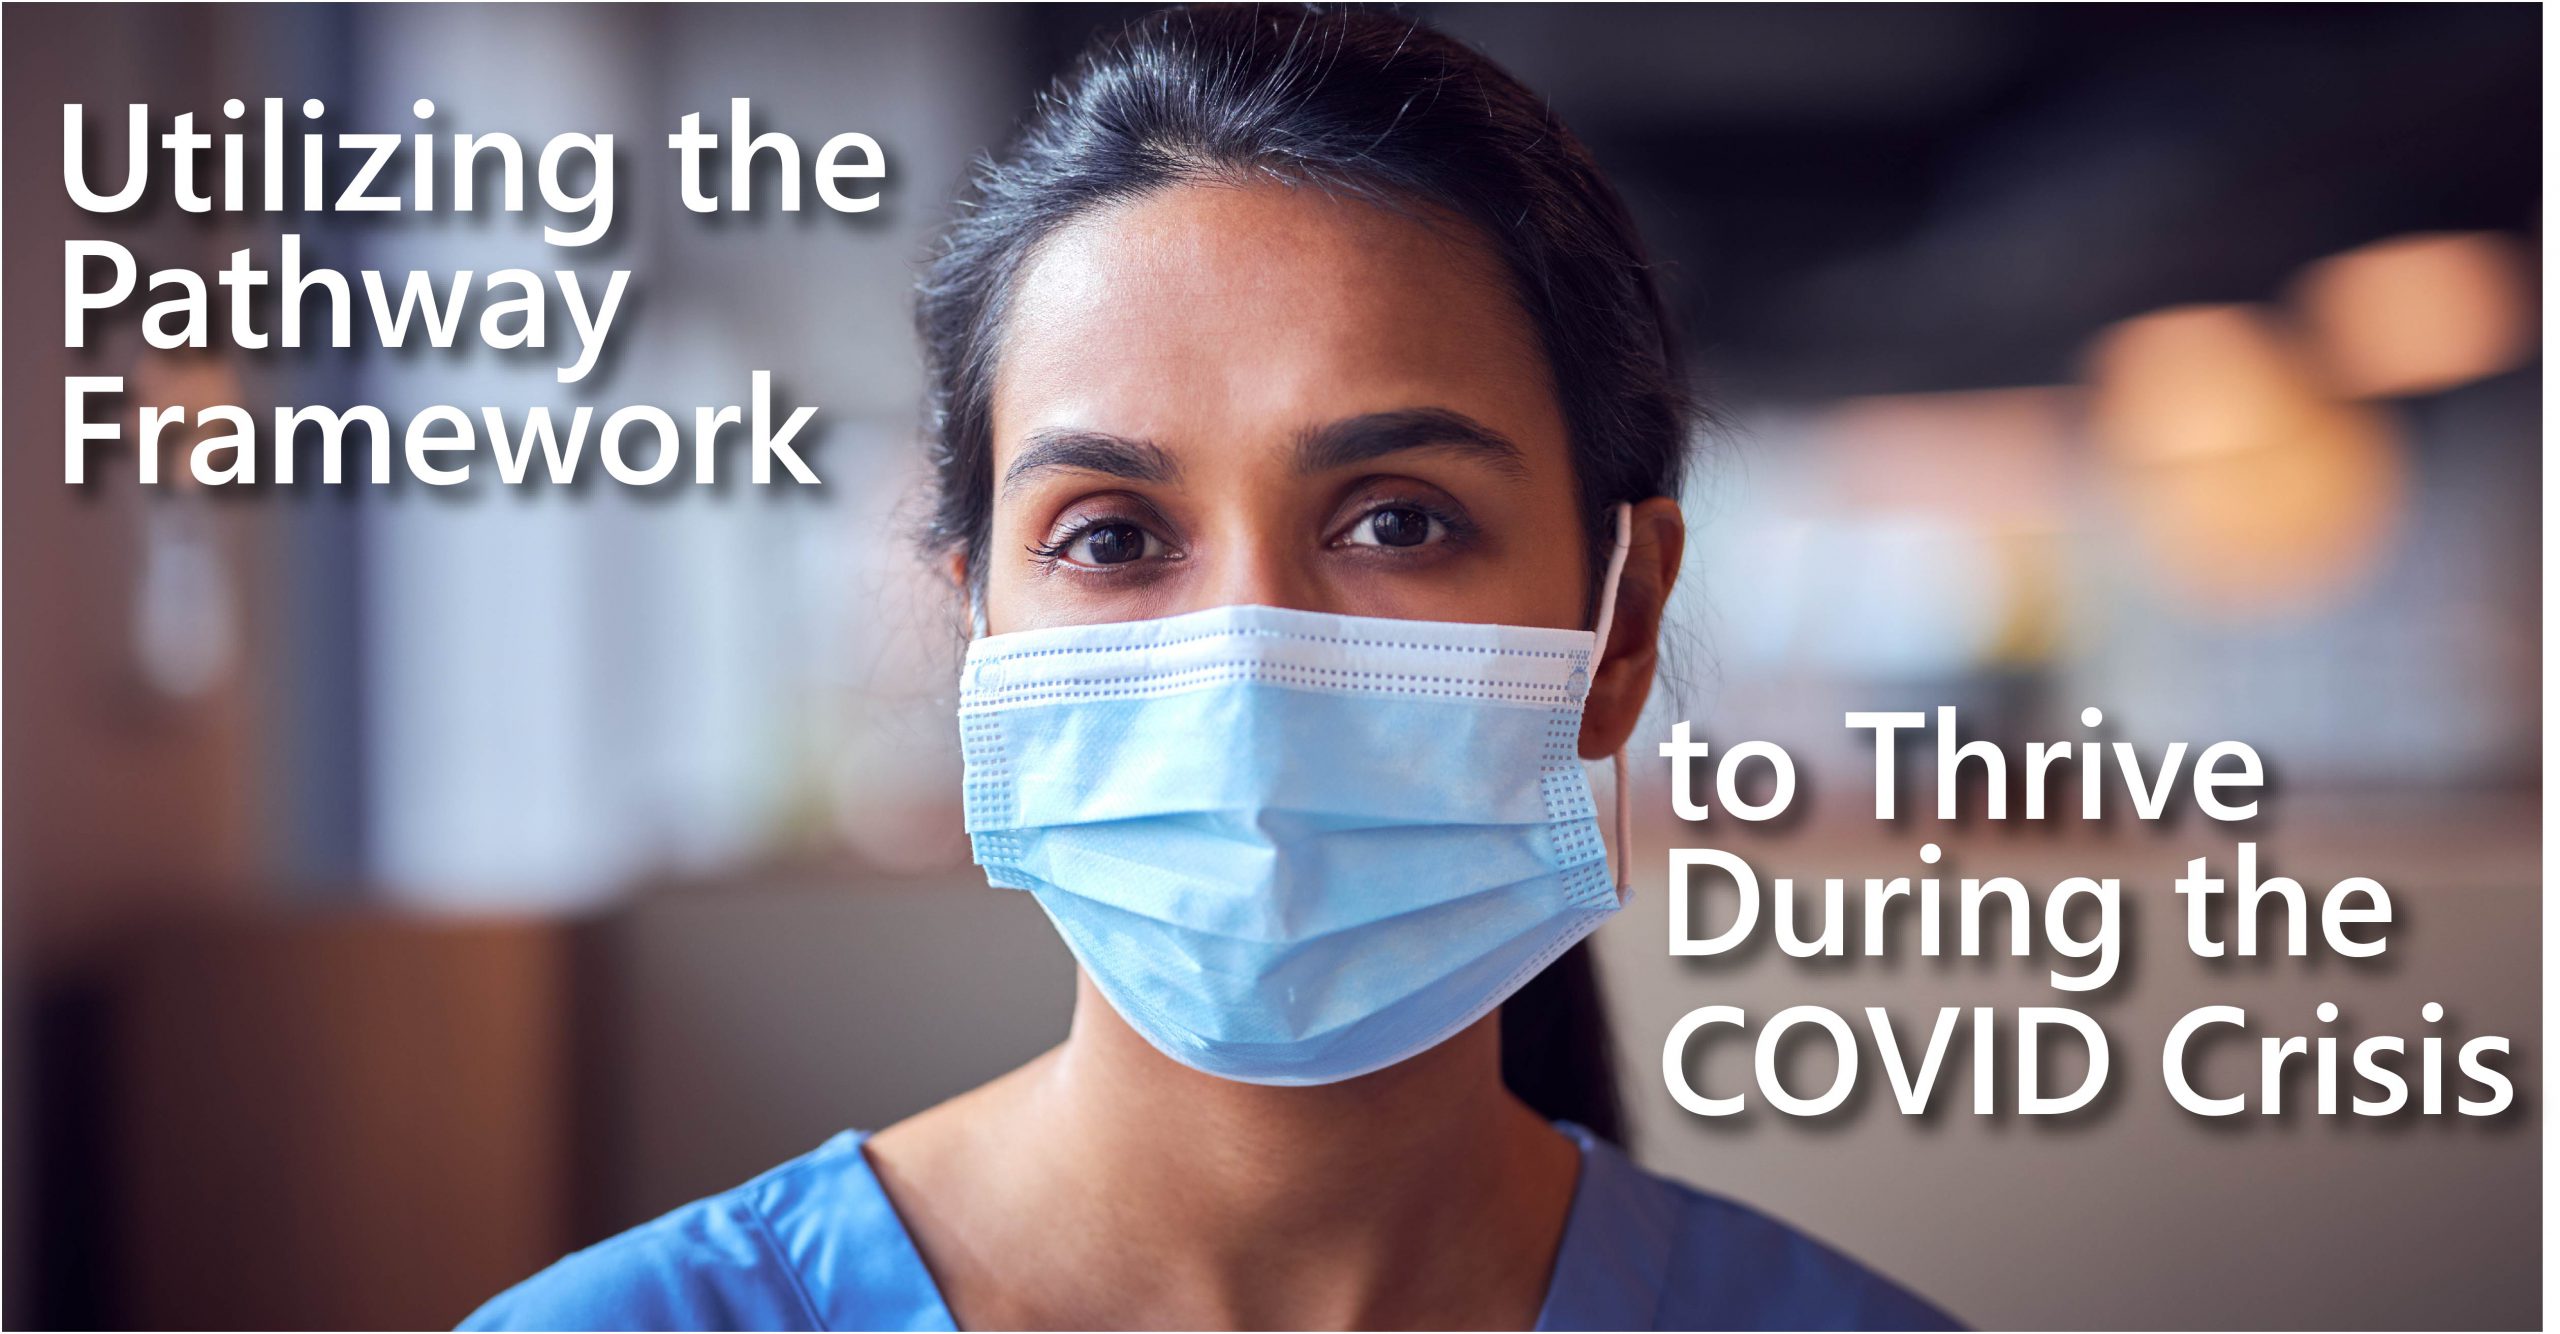 Title of article superimposed over a weary-looking nurse wearing a medical mask